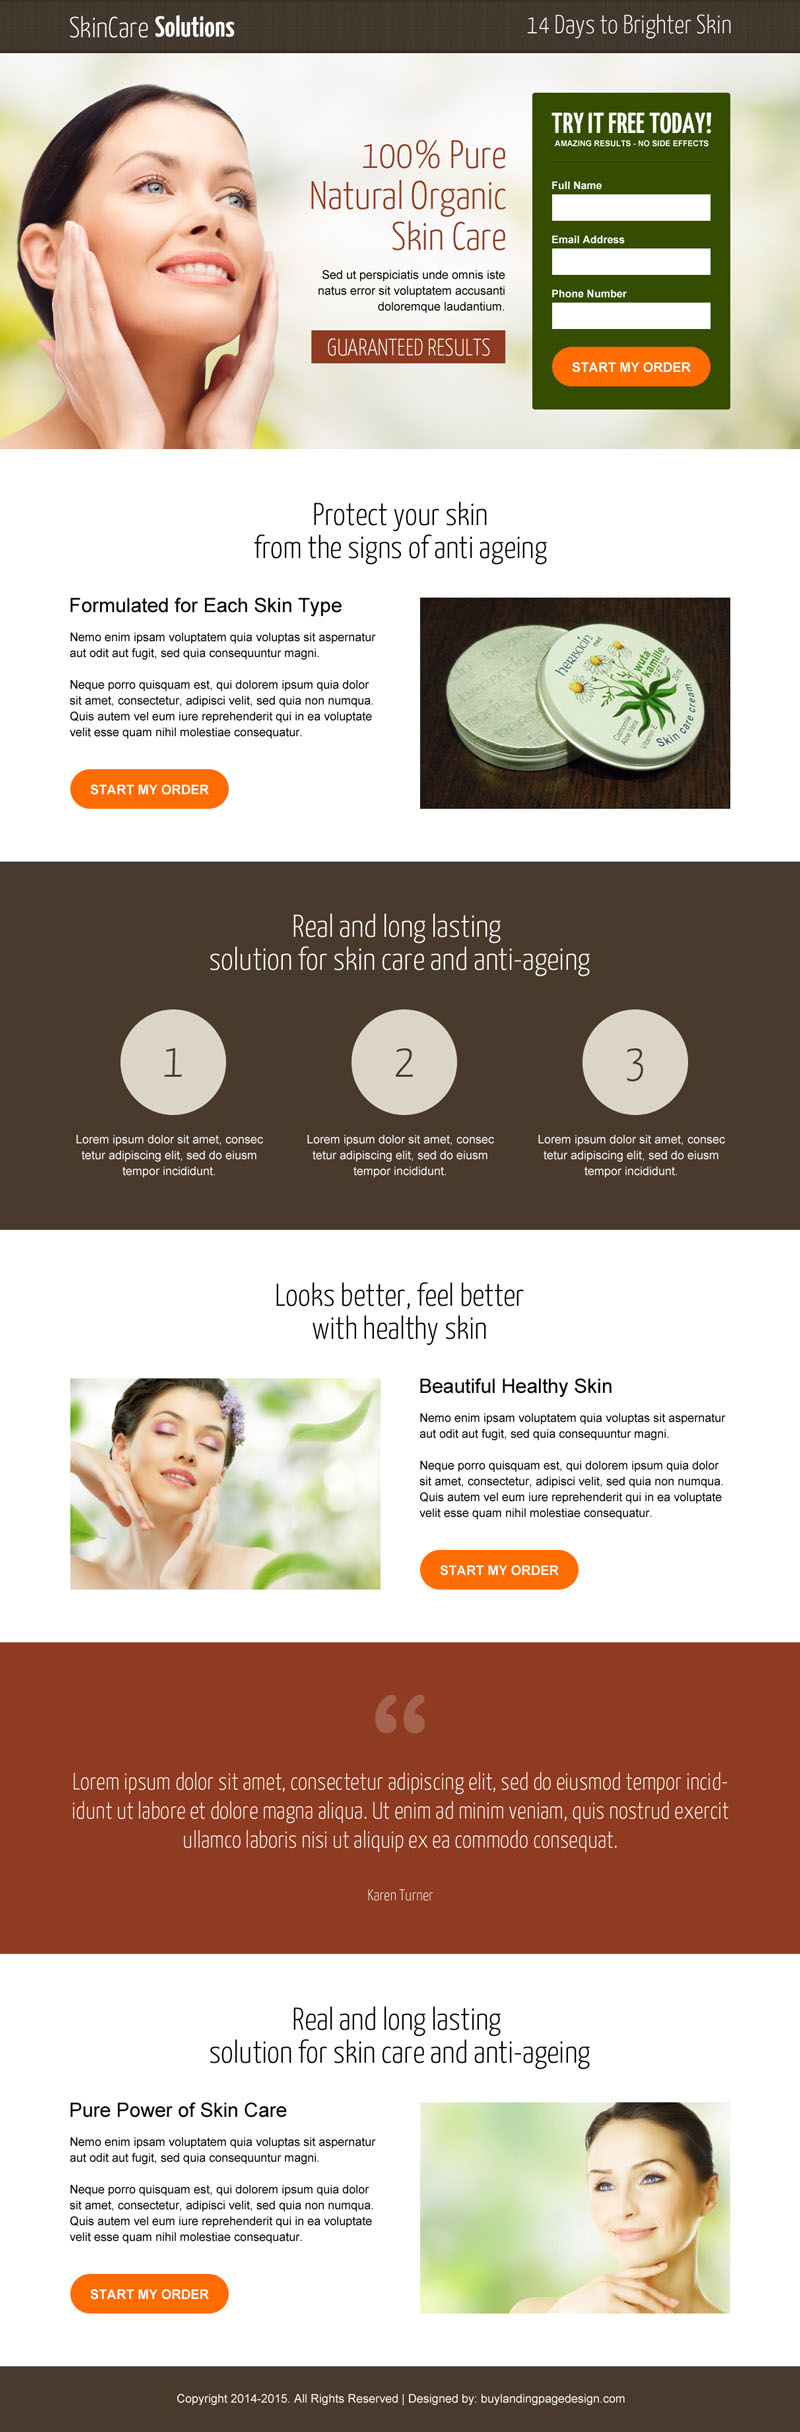 natural-organic-skin-care-product-selling-leads-capture-landing-page-design-template-018